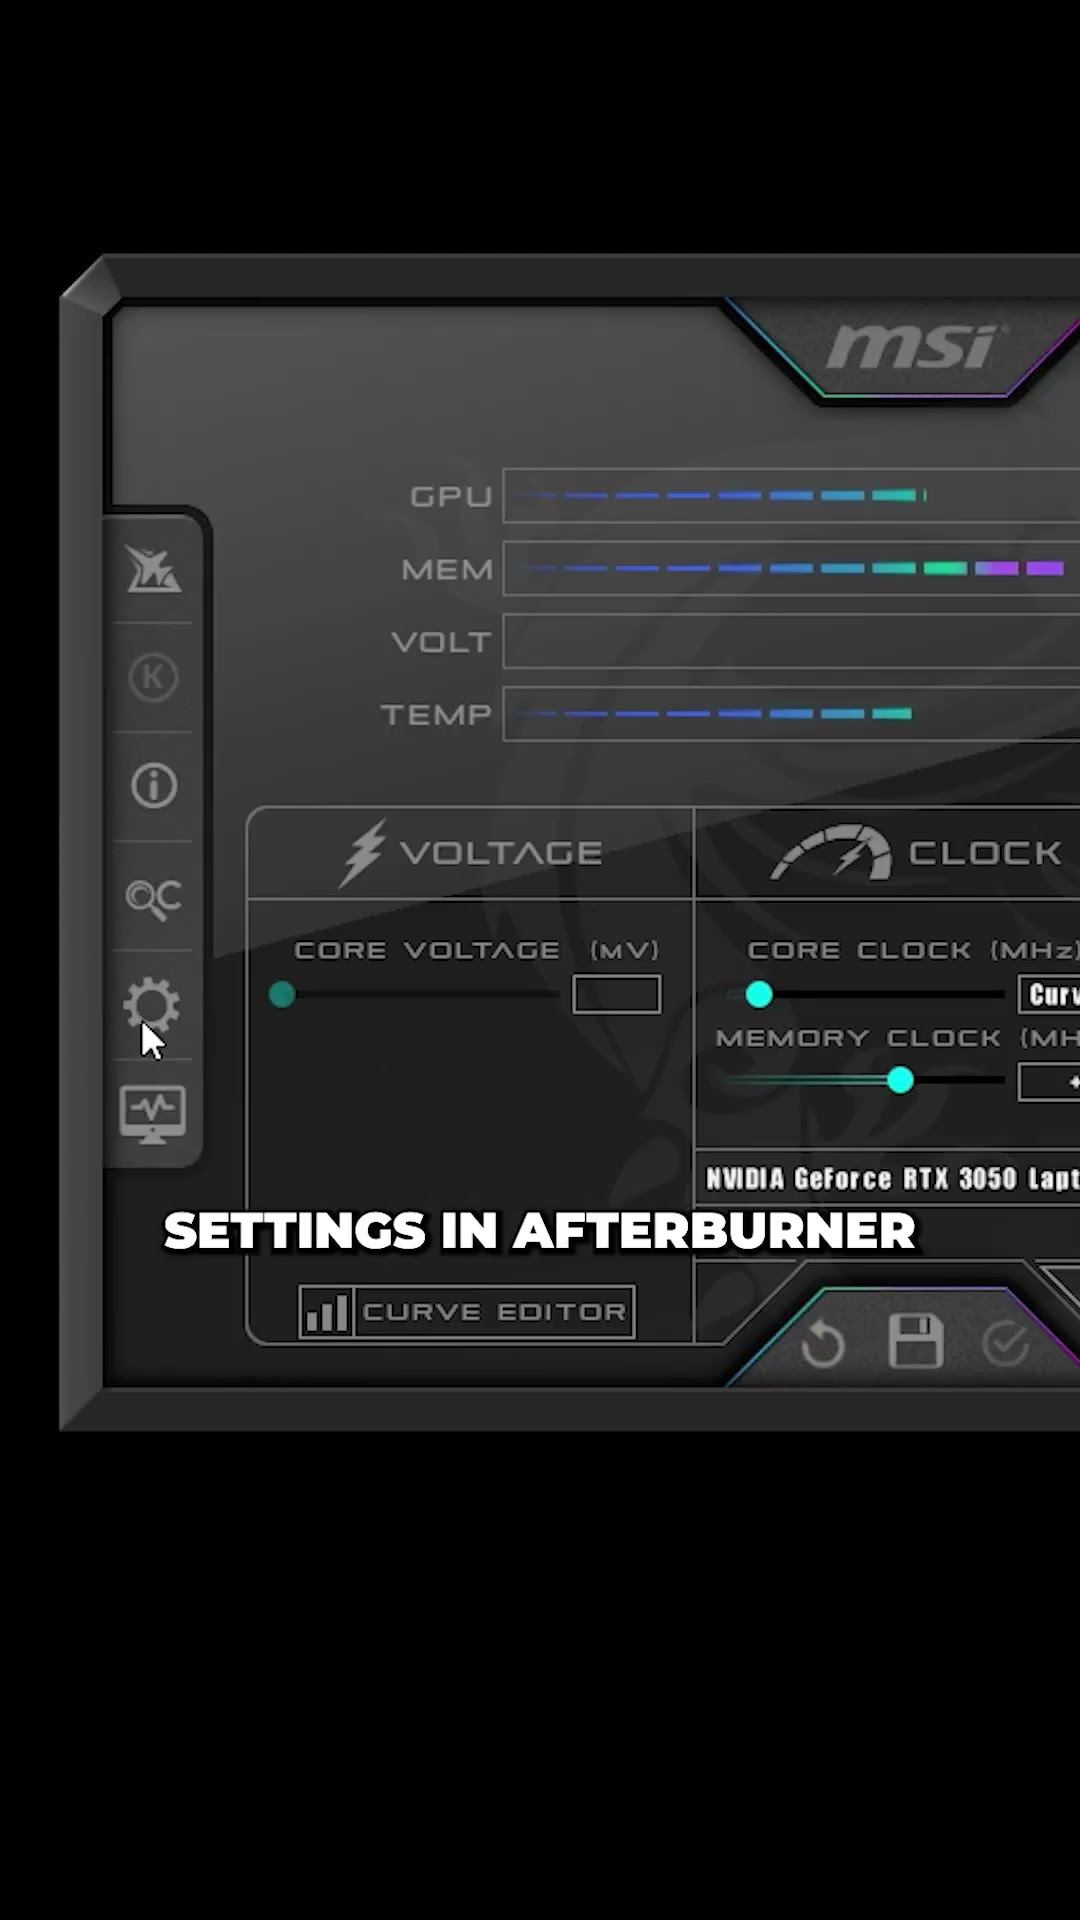 How to use MSI Afterburner to View PC Info